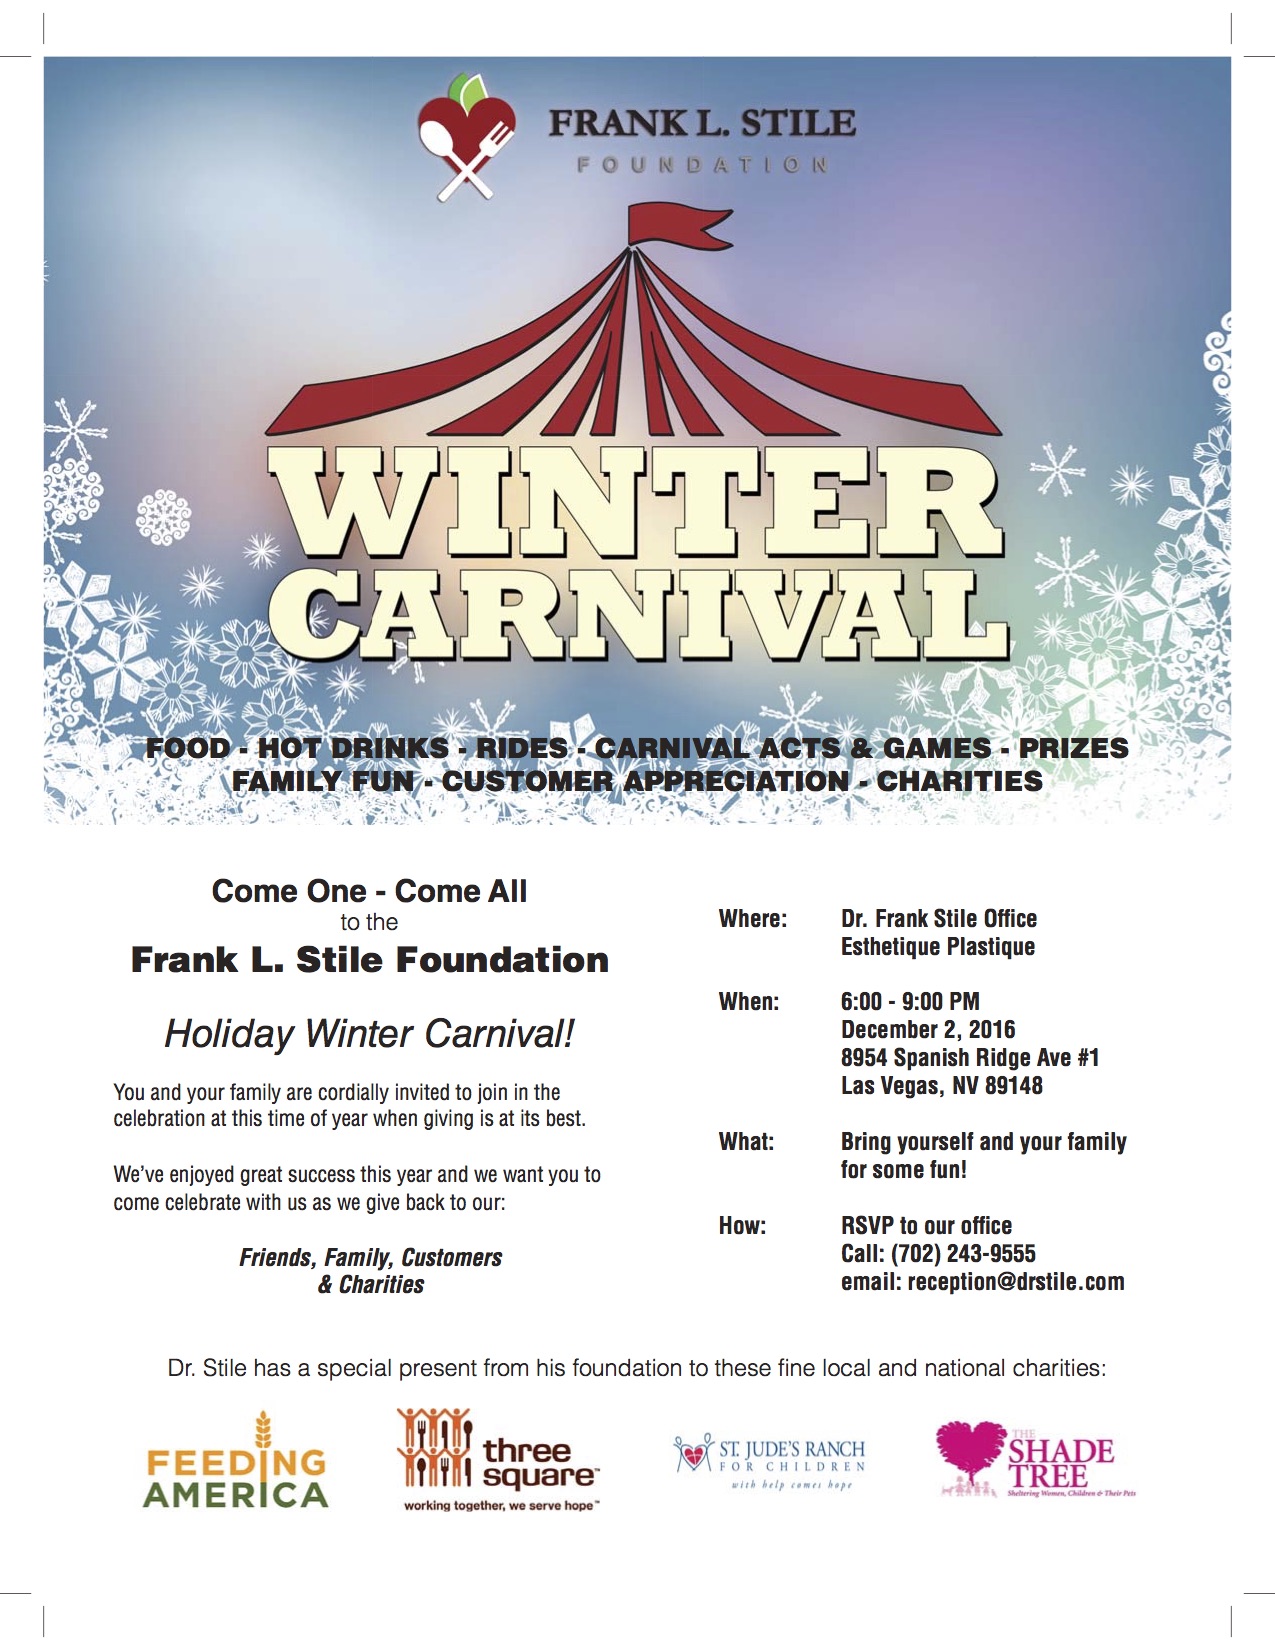 Join The Frank S. Stile Foundation on Dec. 2 for the Holiday Gift Giving Carnival!